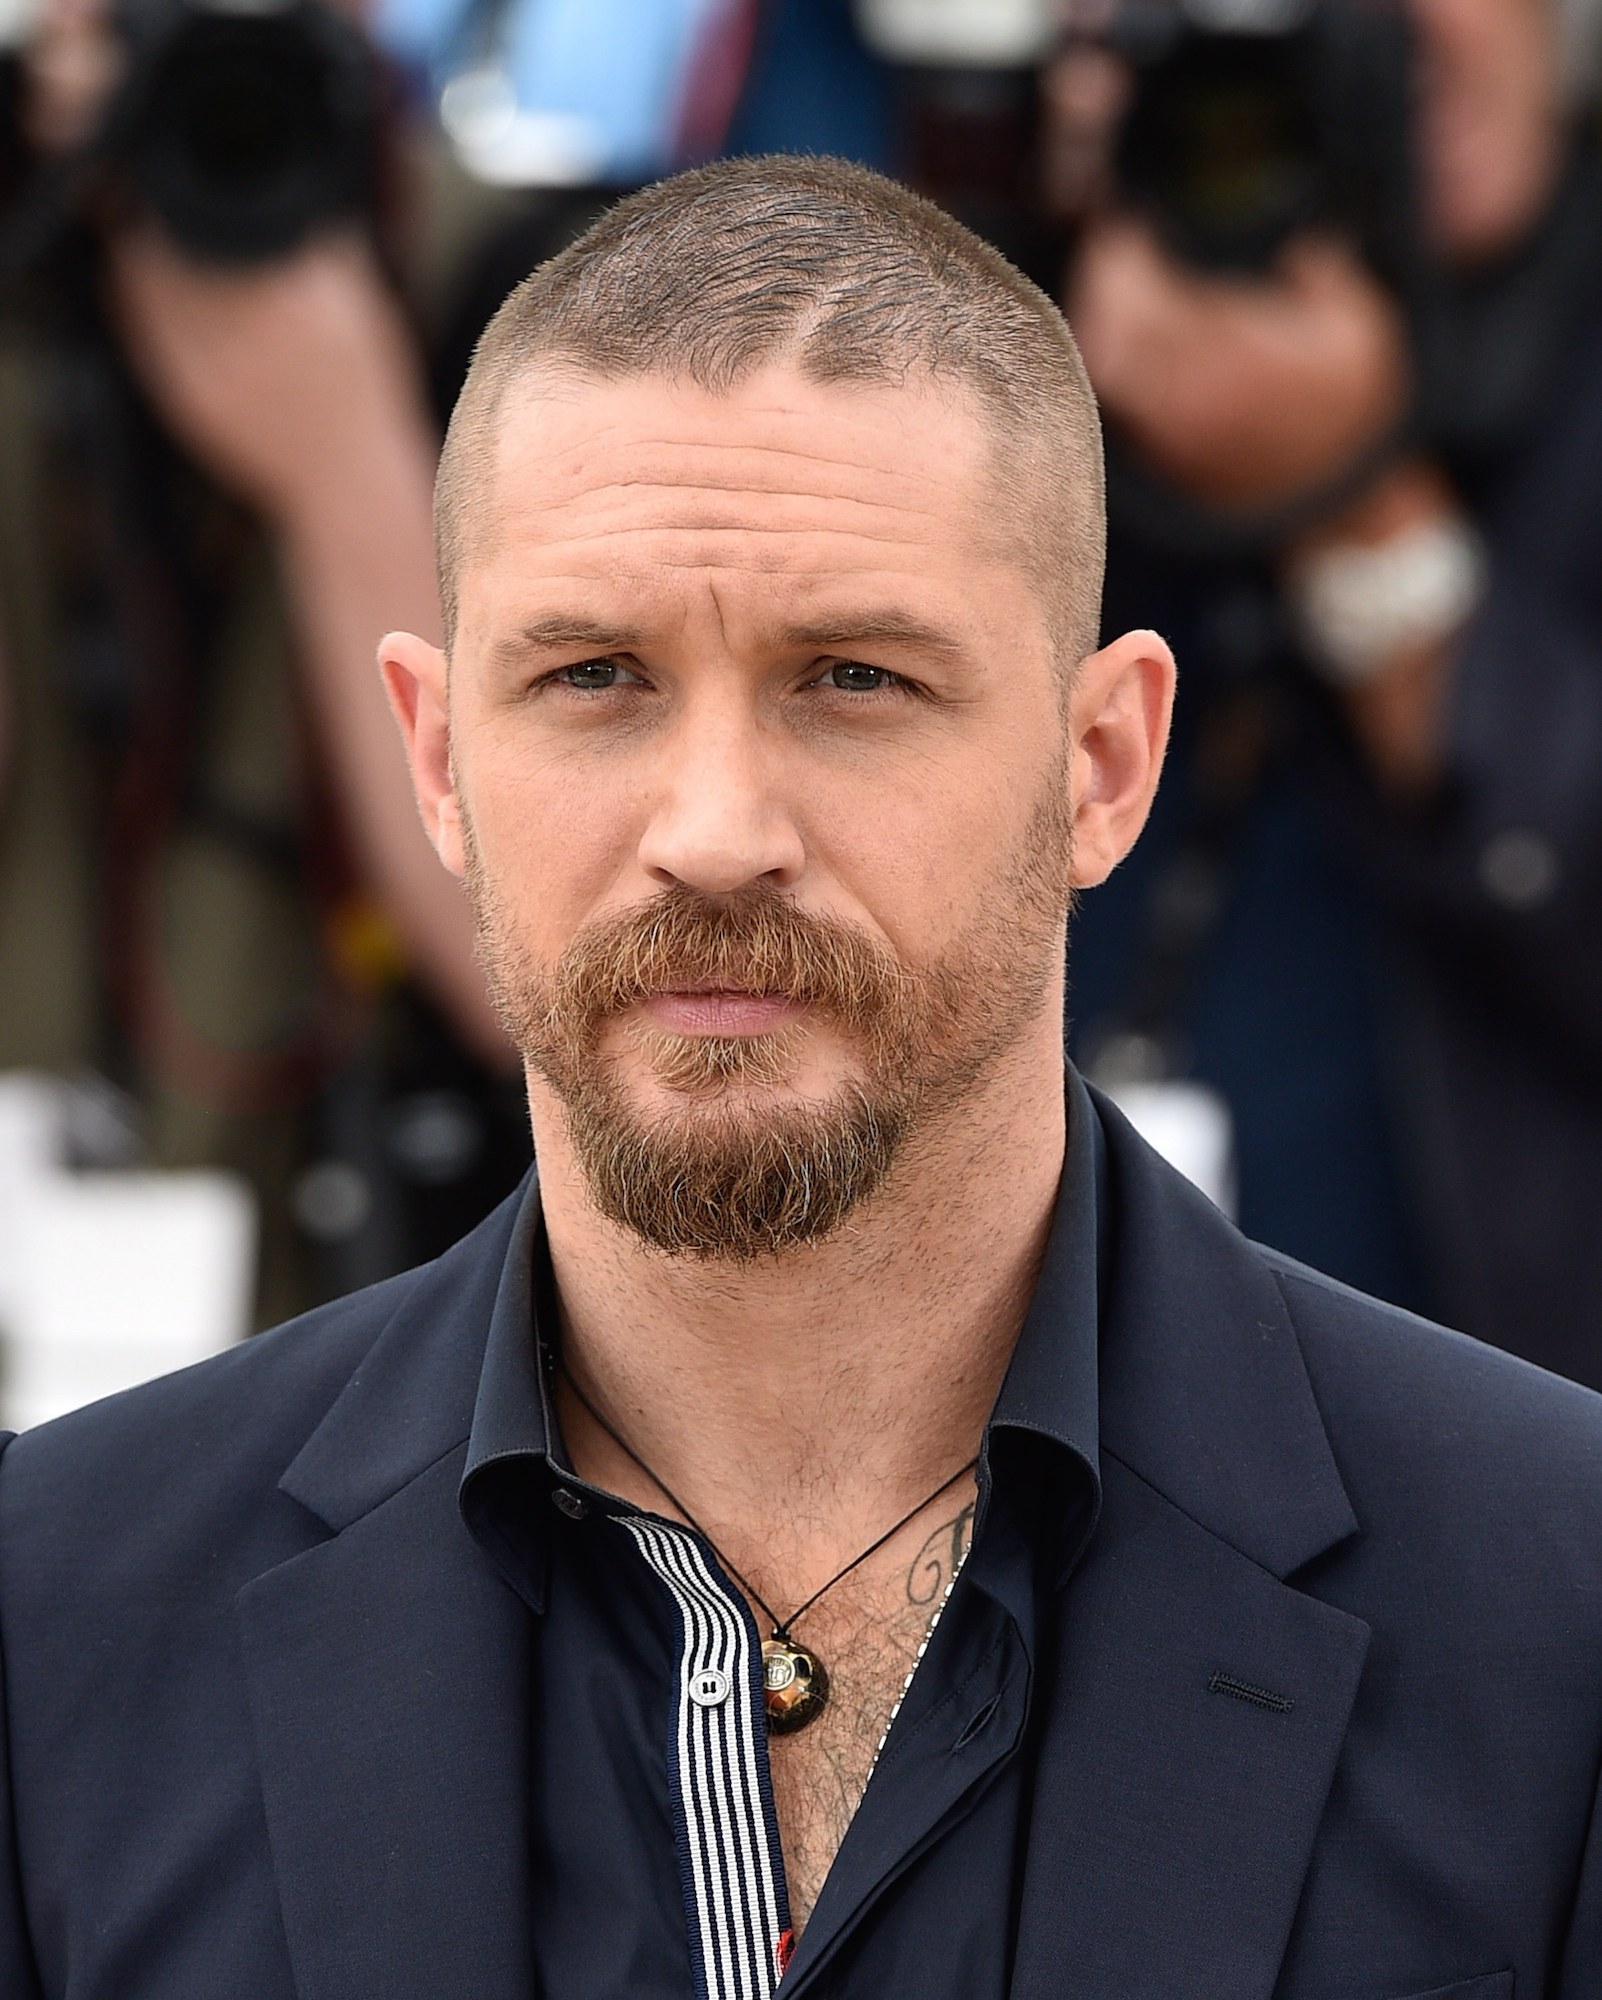  hairstyles for men with beards buzz cuts